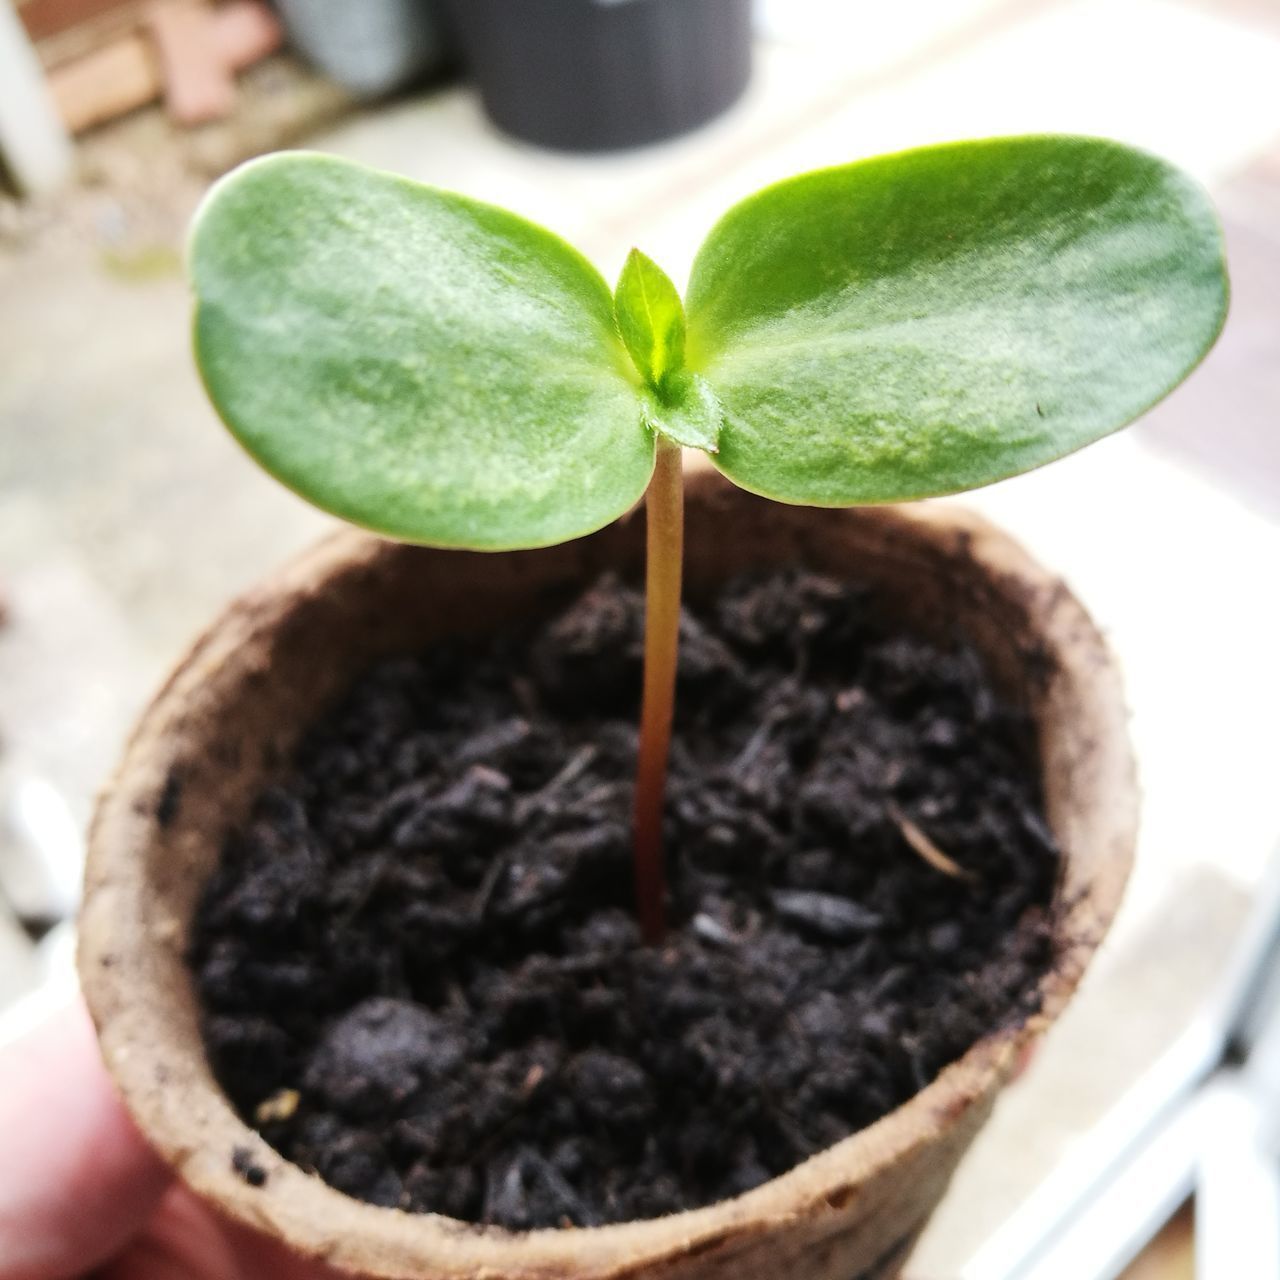 CLOSE-UP OF FRESH POTTED PLANT IN MUD